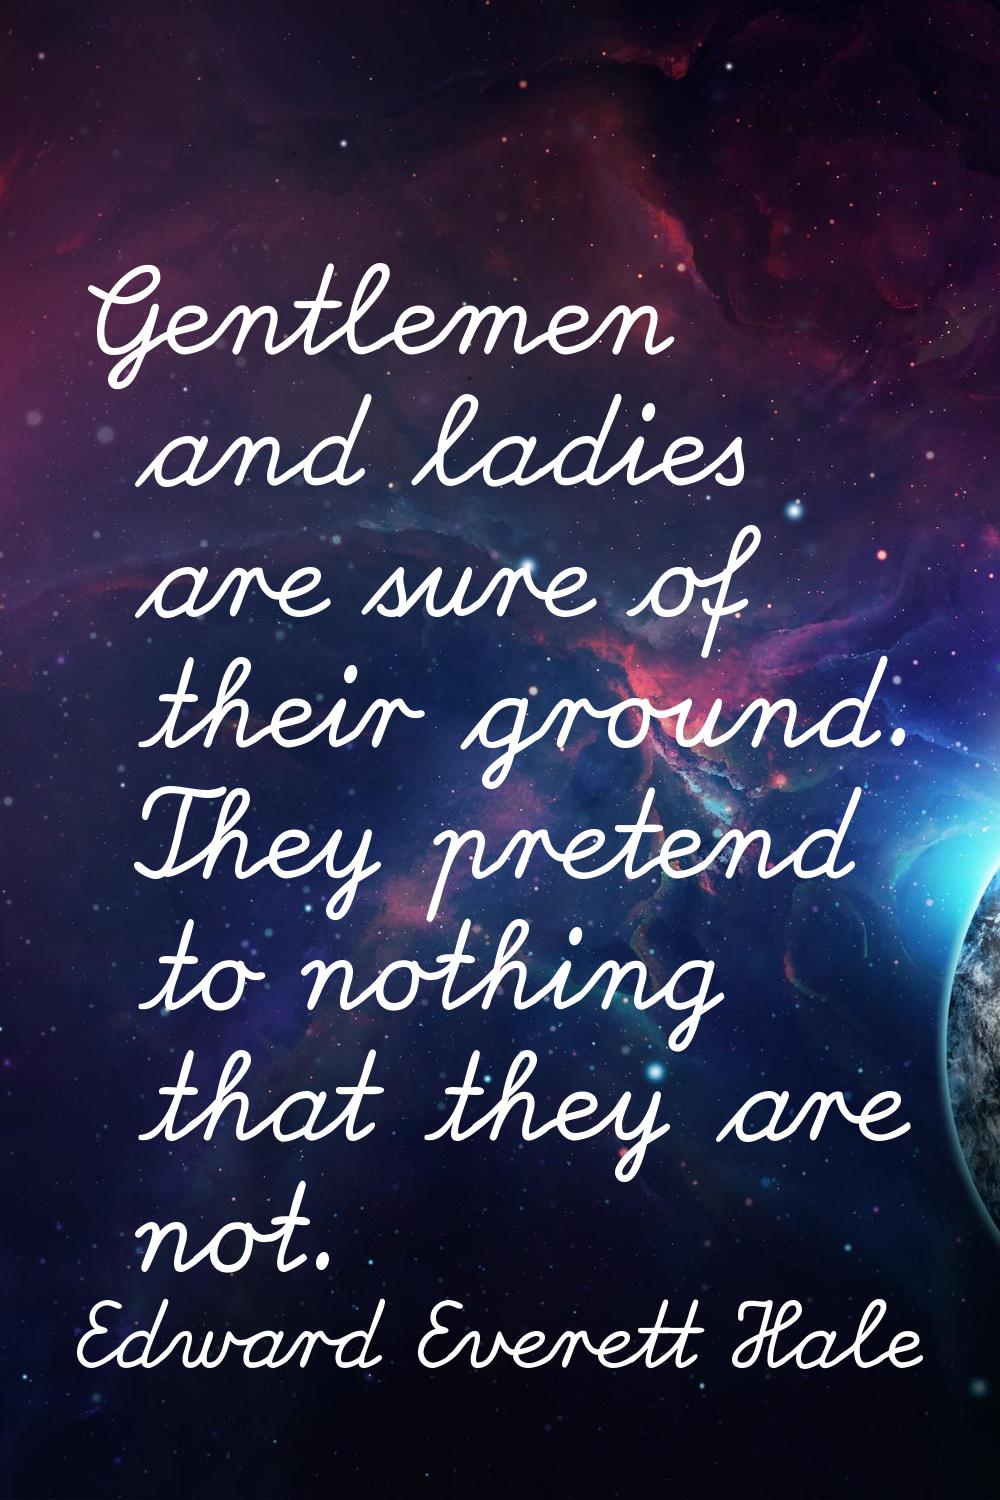 Gentlemen and ladies are sure of their ground. They pretend to nothing that they are not.